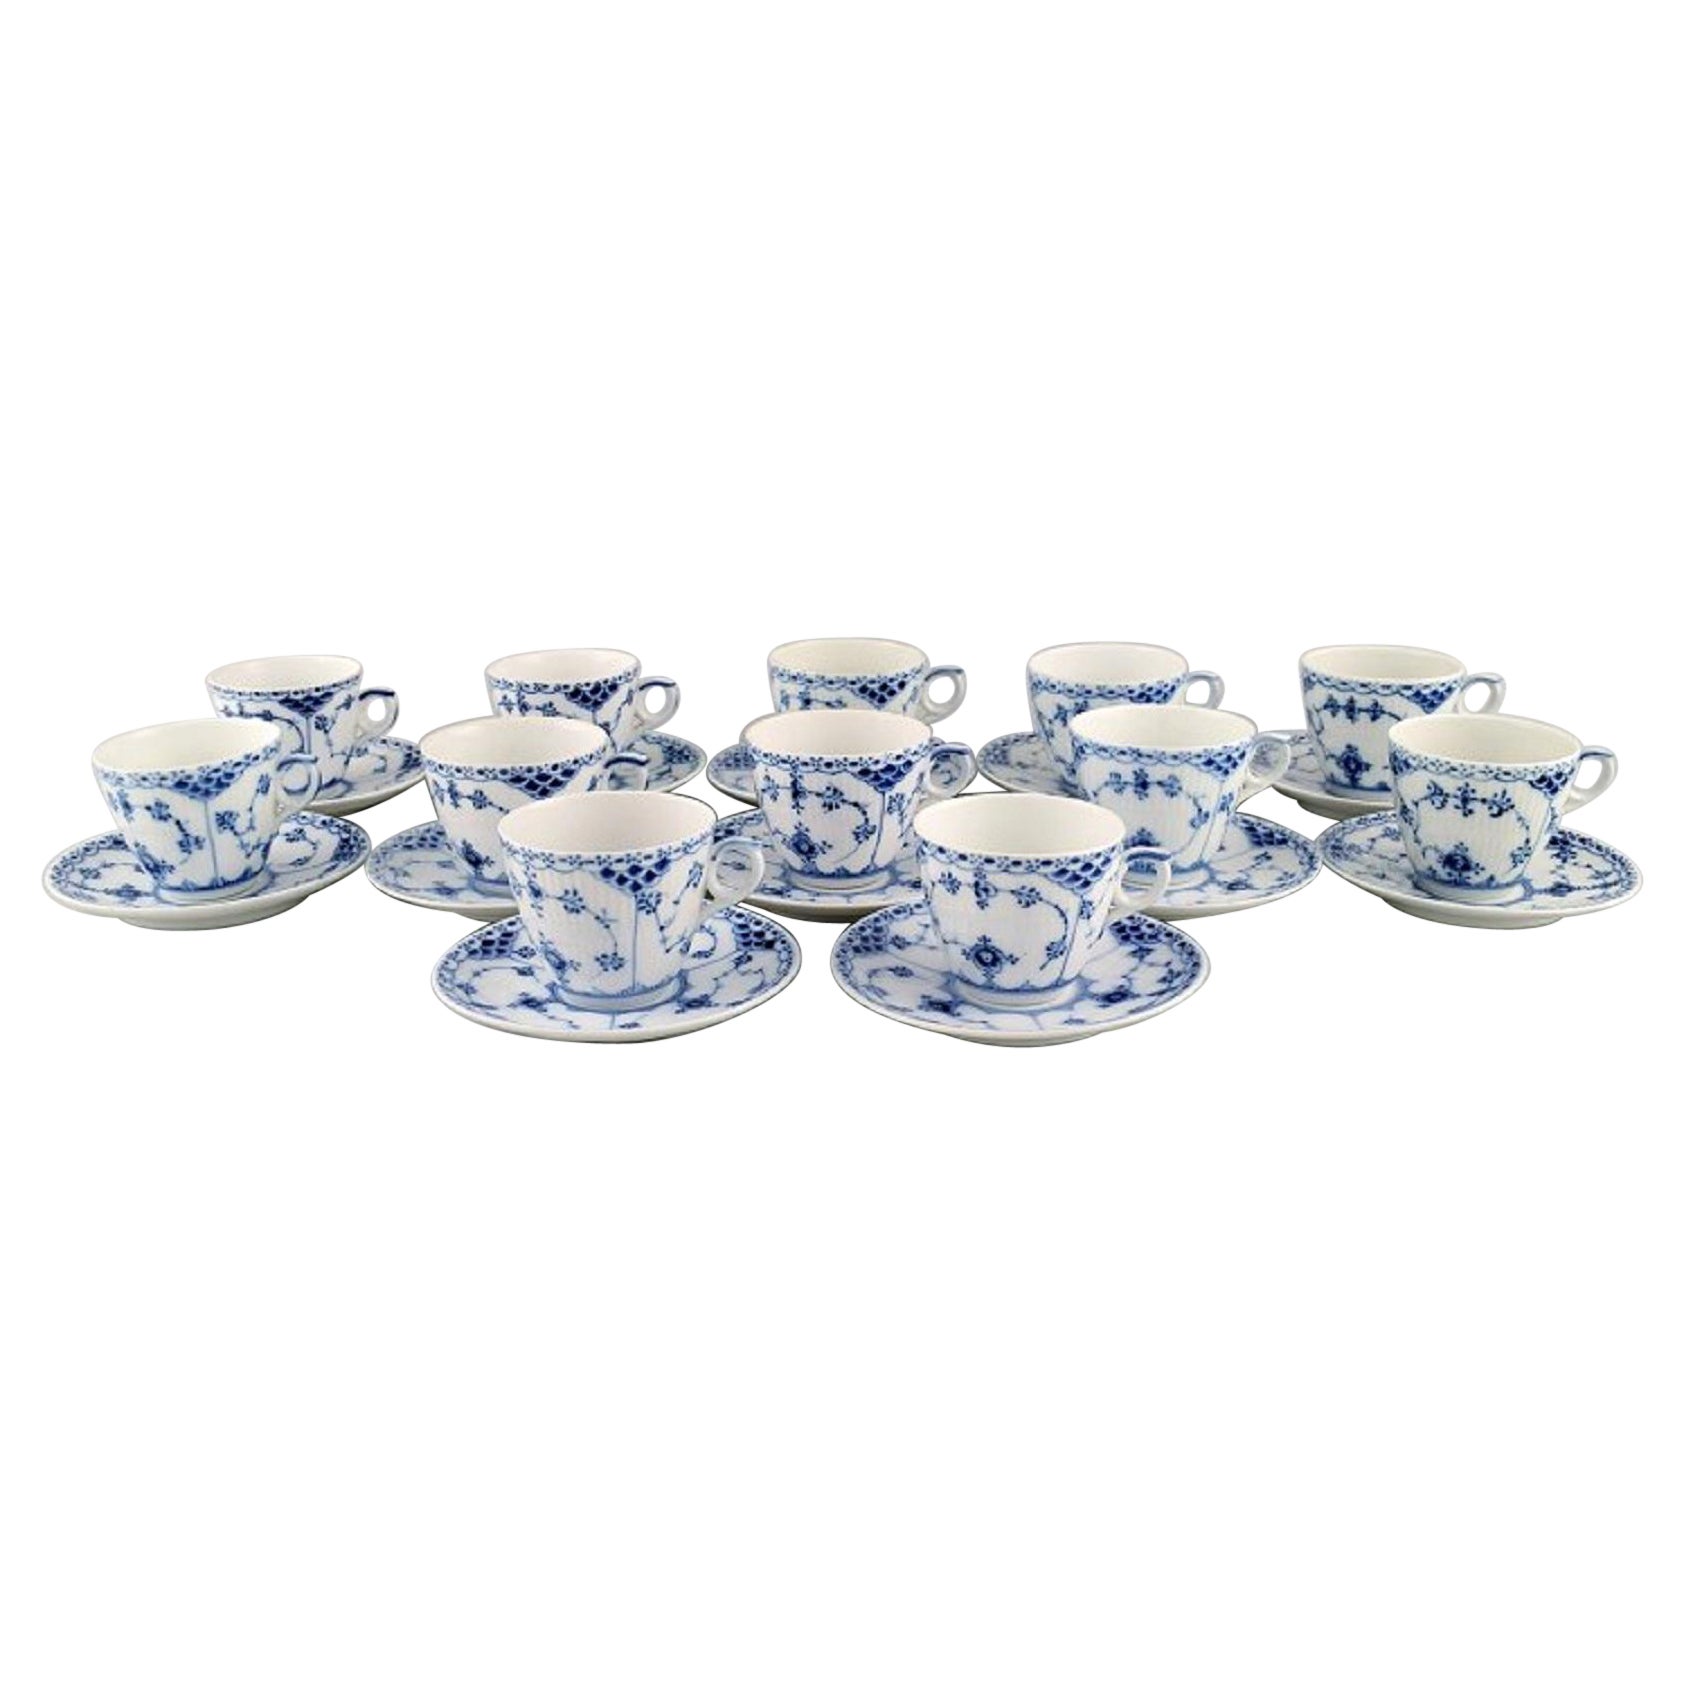 Twelve Royal Copenhagen Blue Fluted Half Lace Coffee Cups with Saucers